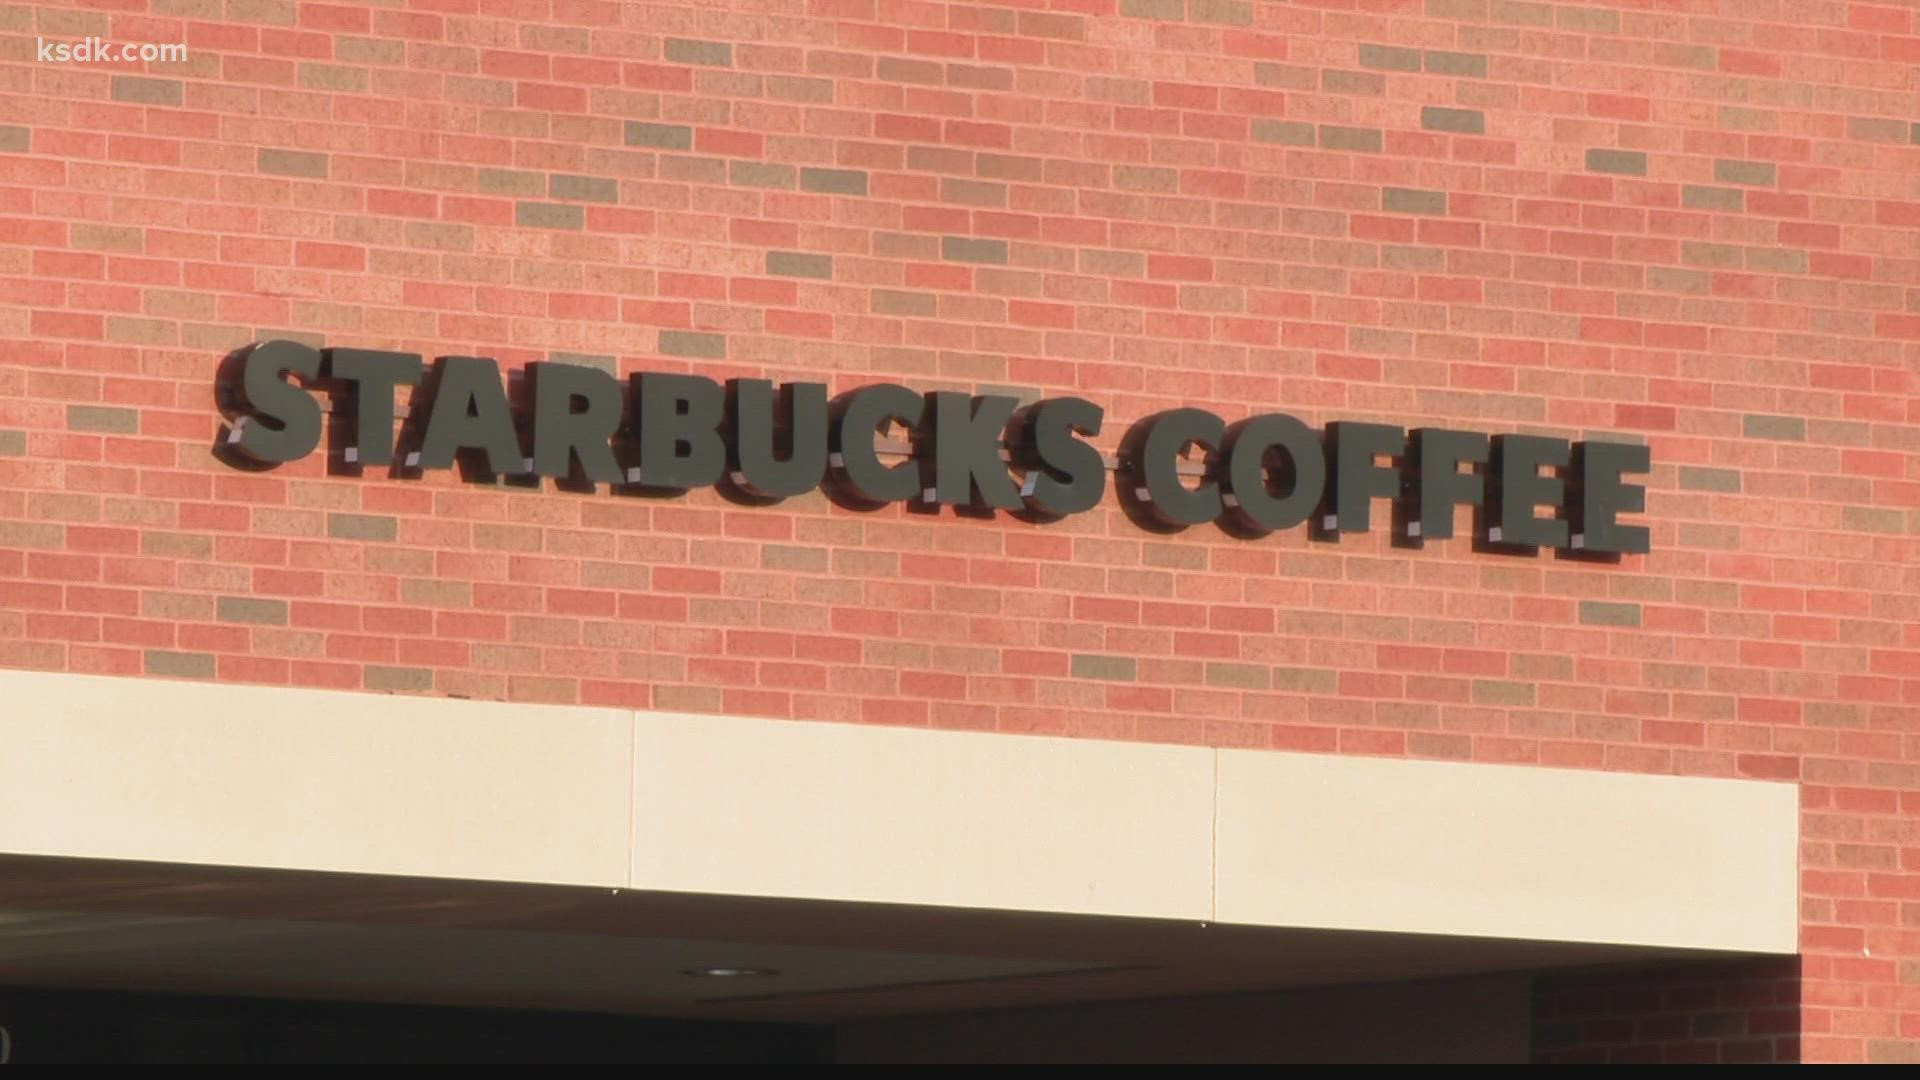 The Starbucks unionization push began last year, when two locations in Buffalo, New York, filed for representation.